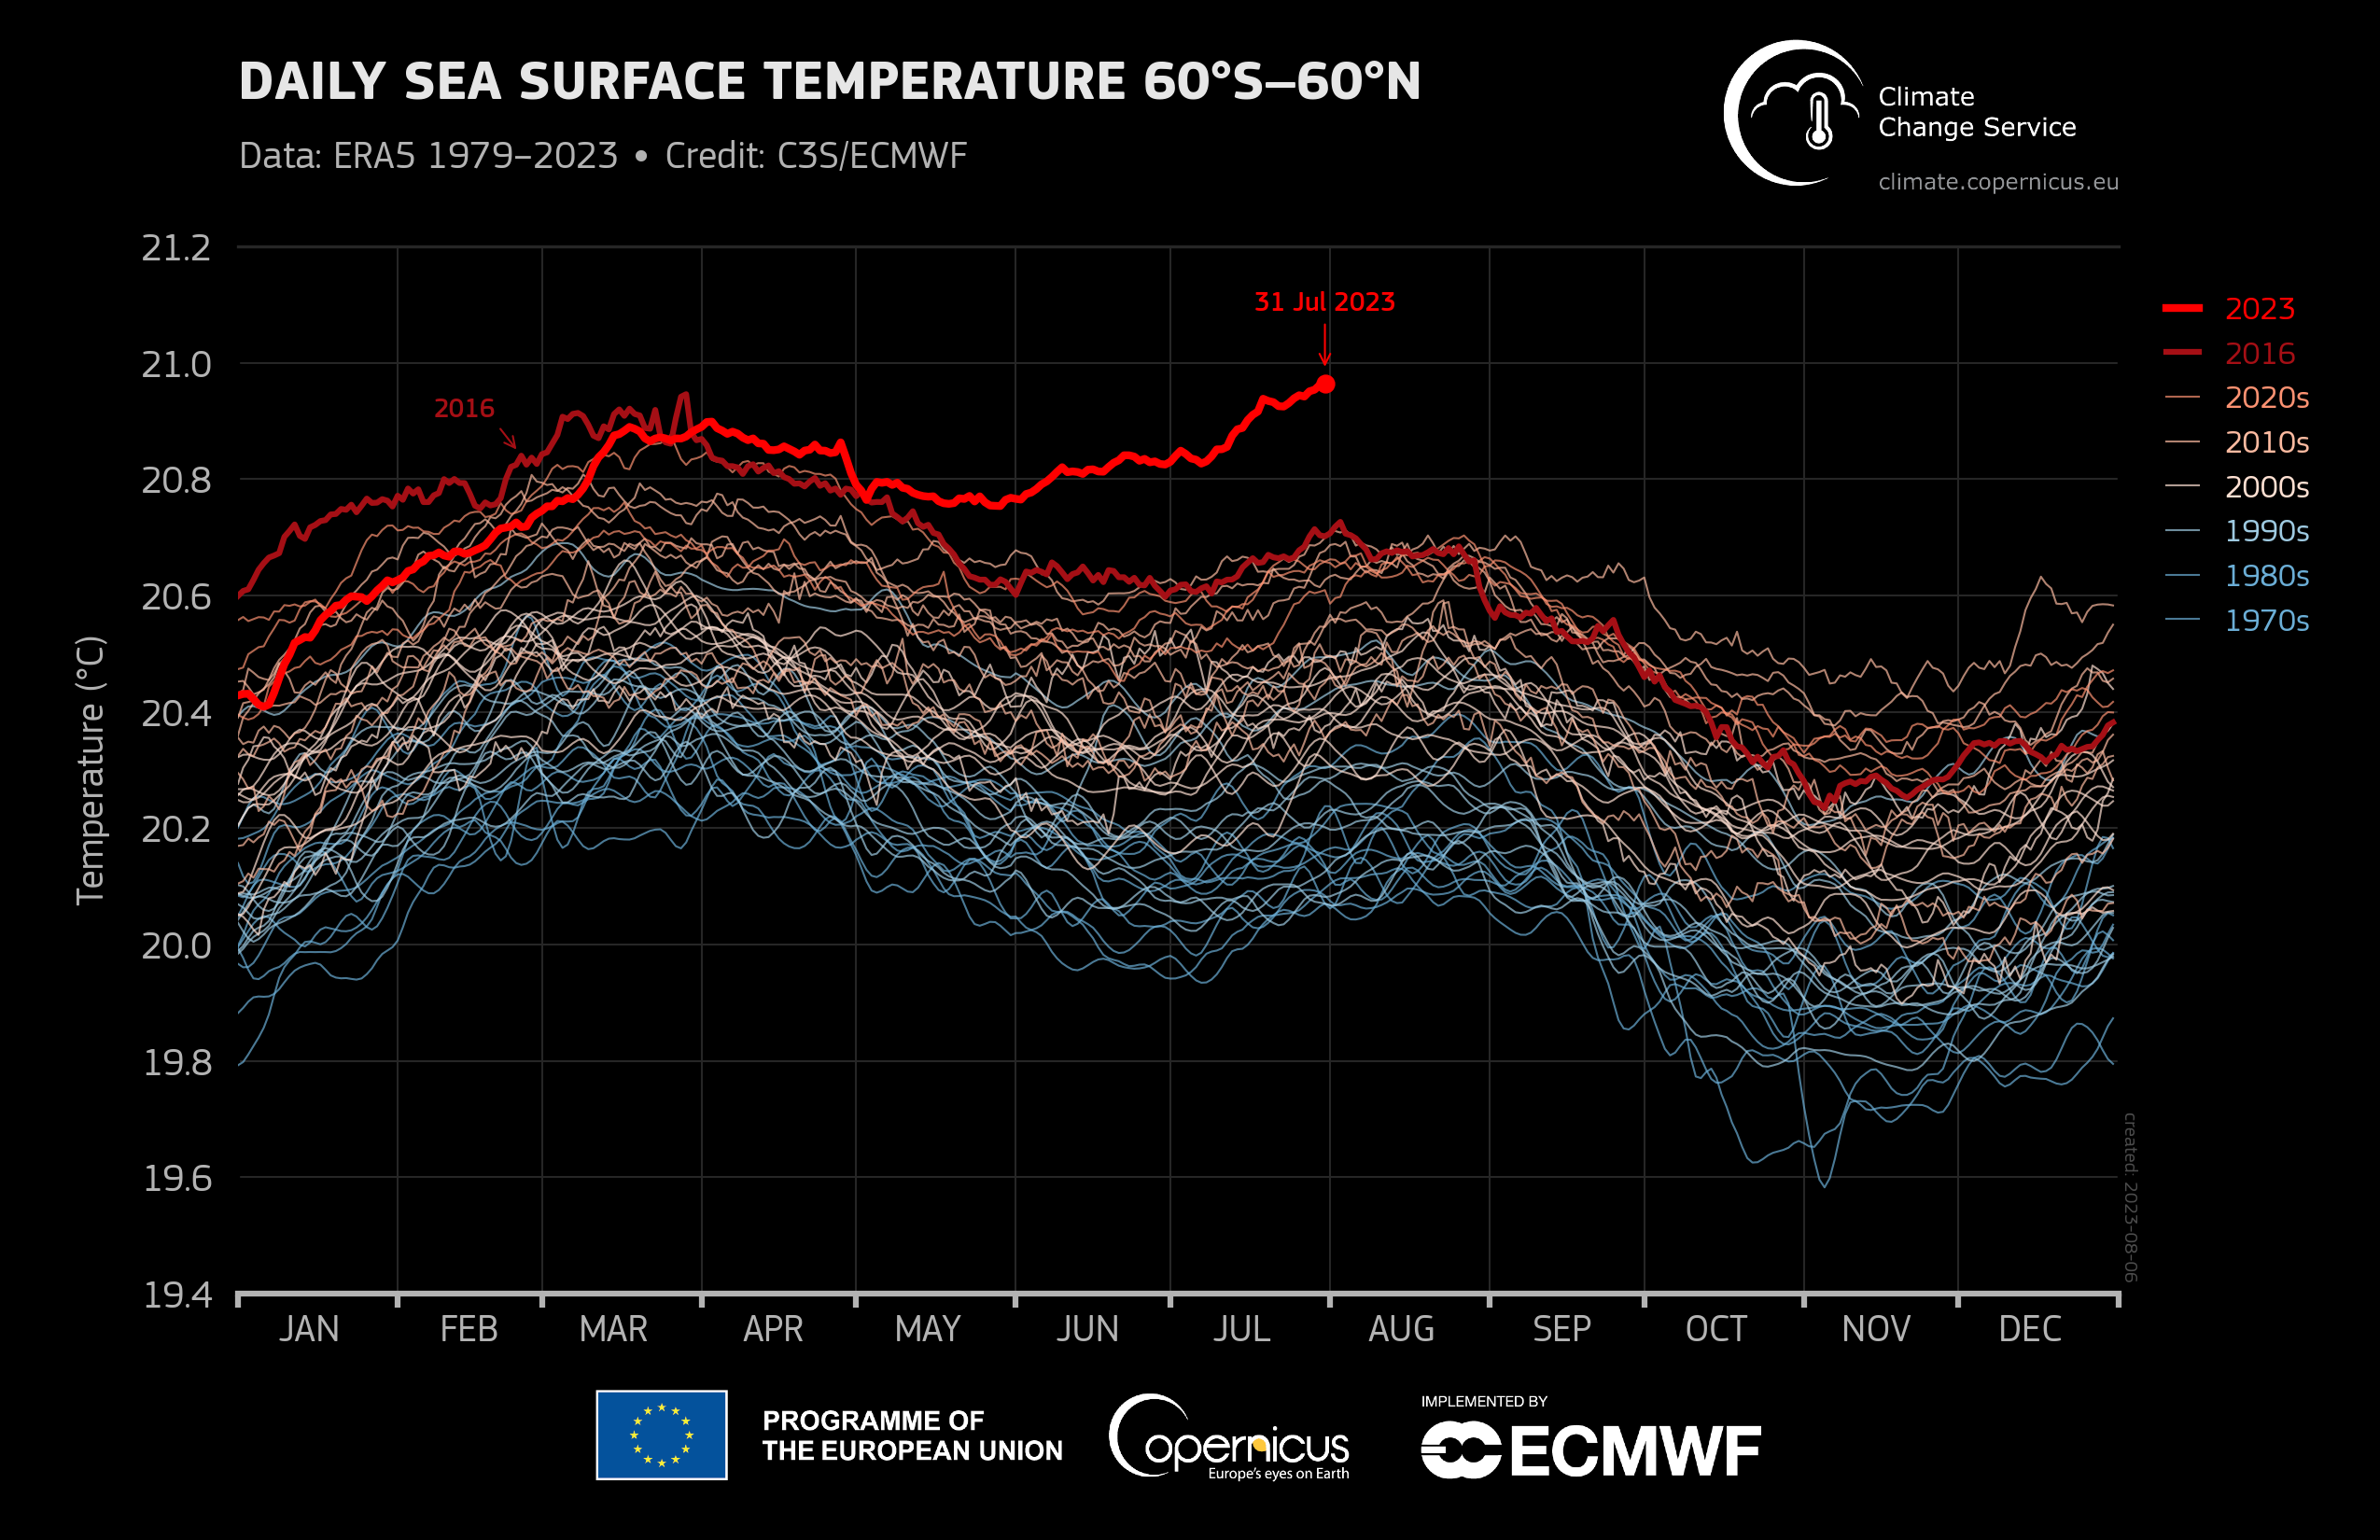 Daily global sea surface temperature (°C) averaged over the 60°S–60°N domain plotted as a time series for each year from 1 January 1979 to 31 July 2023. The years 2023 and 2016 are shown with thick lines shaded in bright red and dark red, respectively. Other years are shown with thin lines and shaded according to the decade, from blue (1970s) to brick red (2020s). Data: ERA5. Graphic: C3S/ECMWF